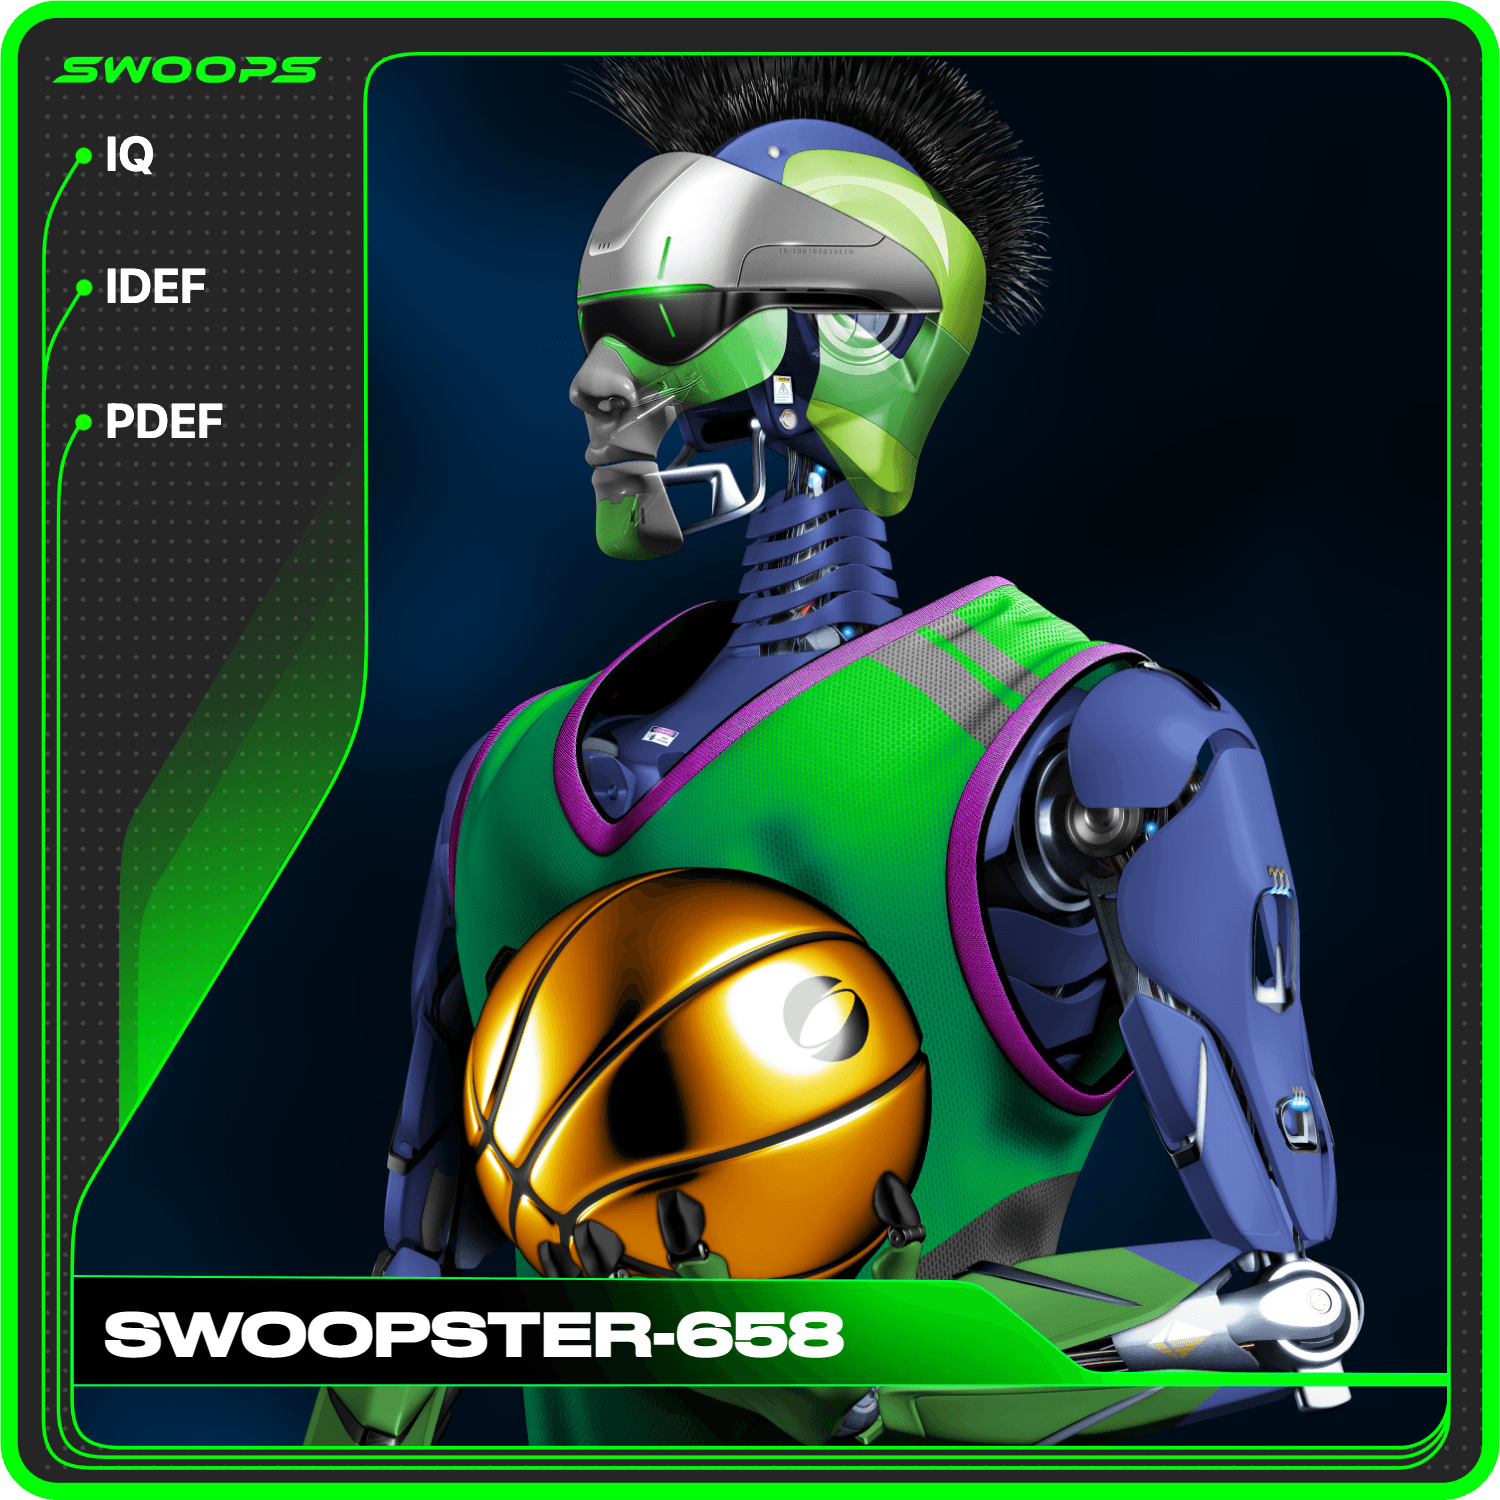 SWOOPSTER-658